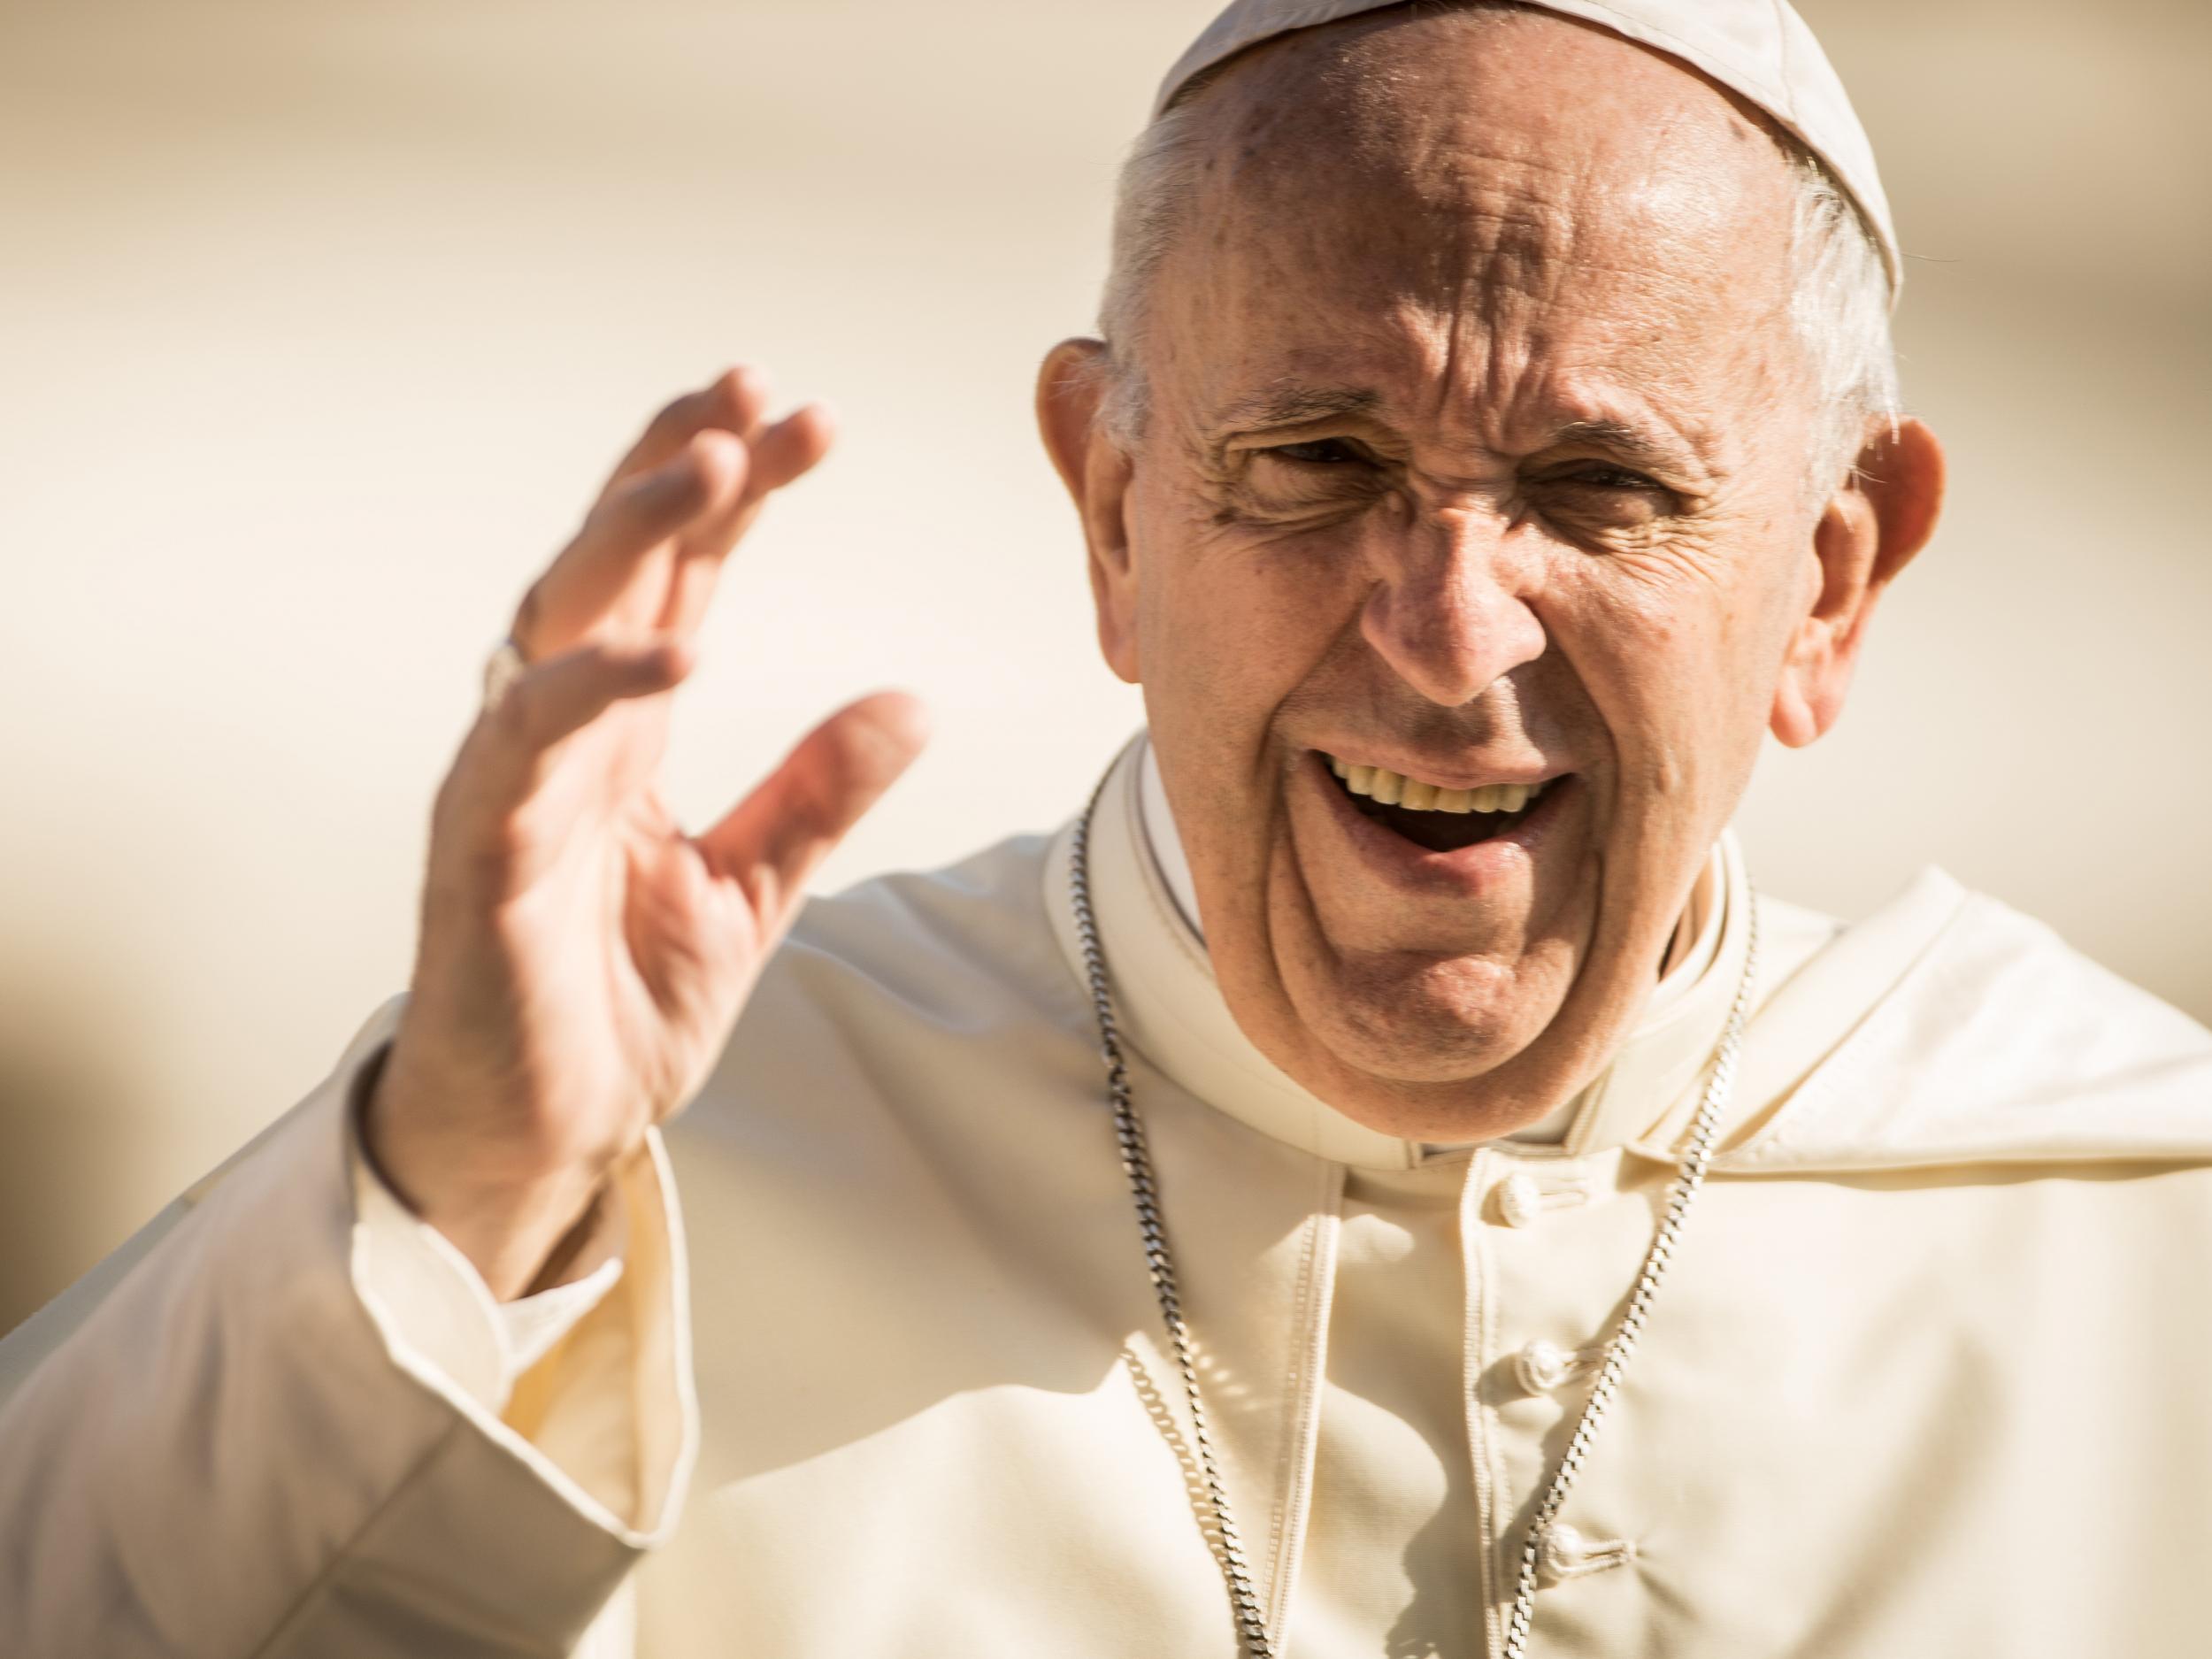 Pope Francis says people must urgently act to protect the world's water sources